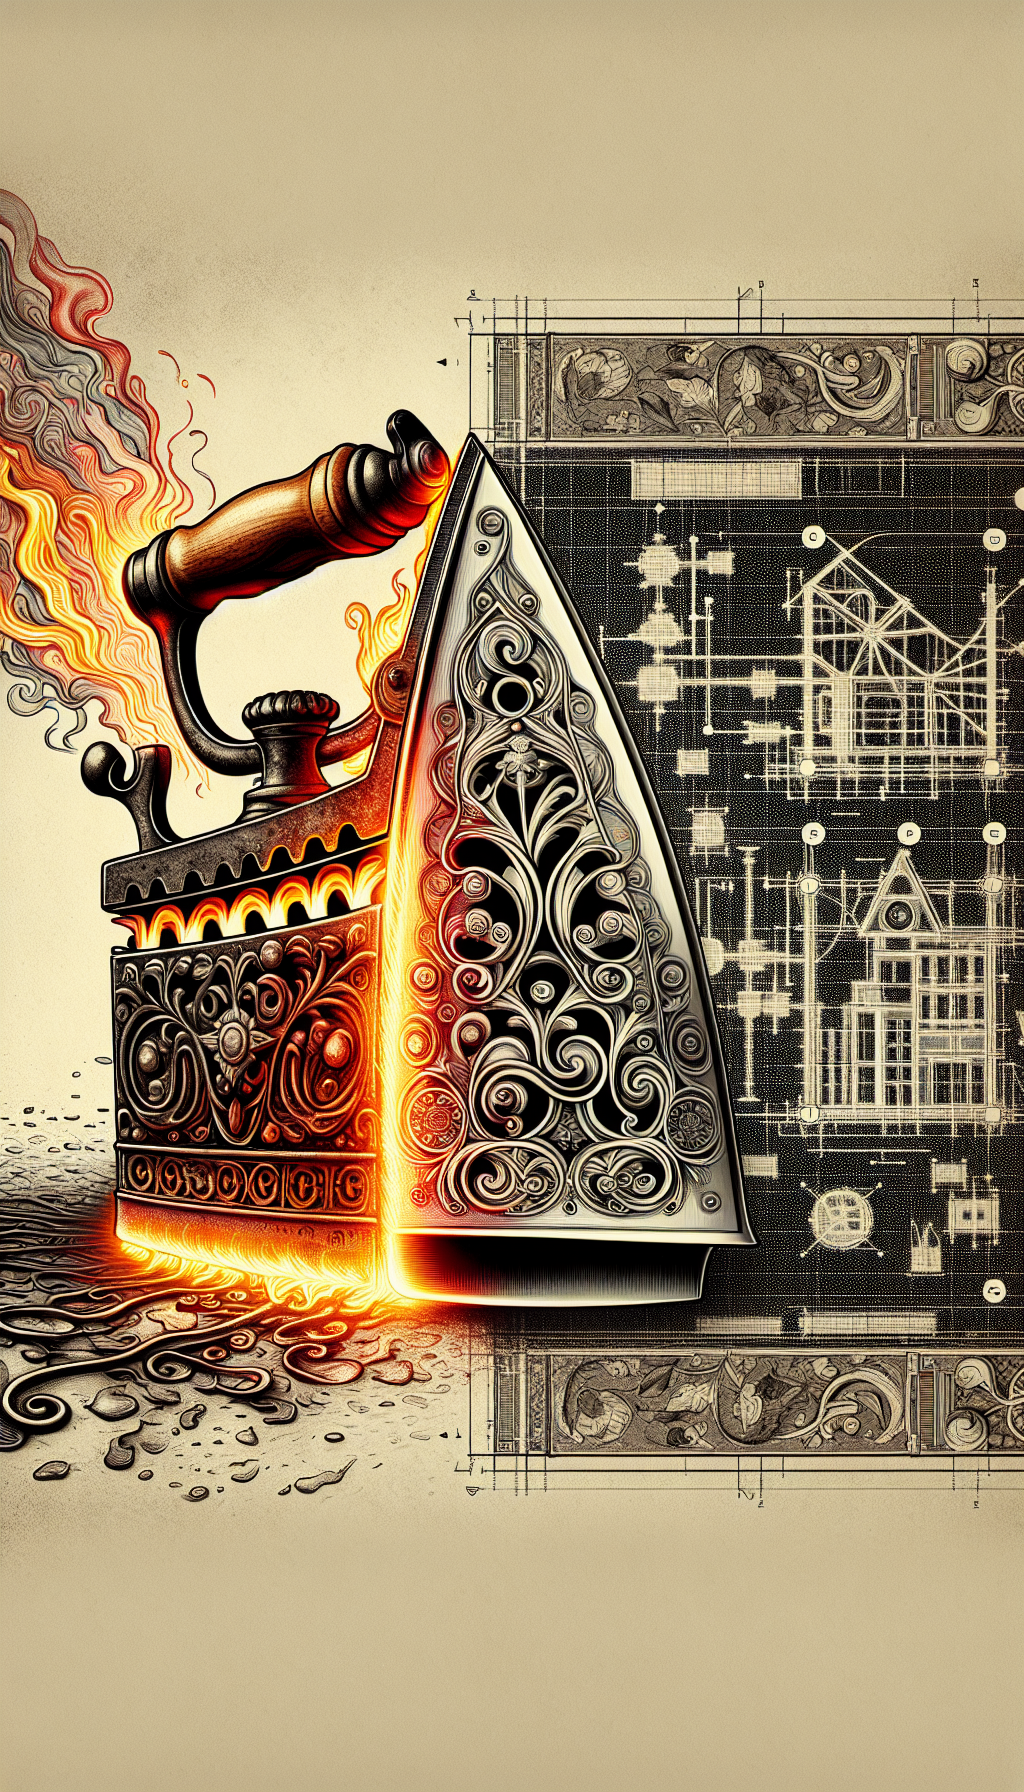 An illustration of an antique iron melting into a blueprint of architectural design, with ornate elements morphing into modern construction symbols, on one side vivid Victorian patterns, and on the other side streamlined Art Deco motifs. The juxtaposition showcases the influence of design evolution in both architecture and iron crafts, underlining the historical worth of irons within a transformative visual narrative.